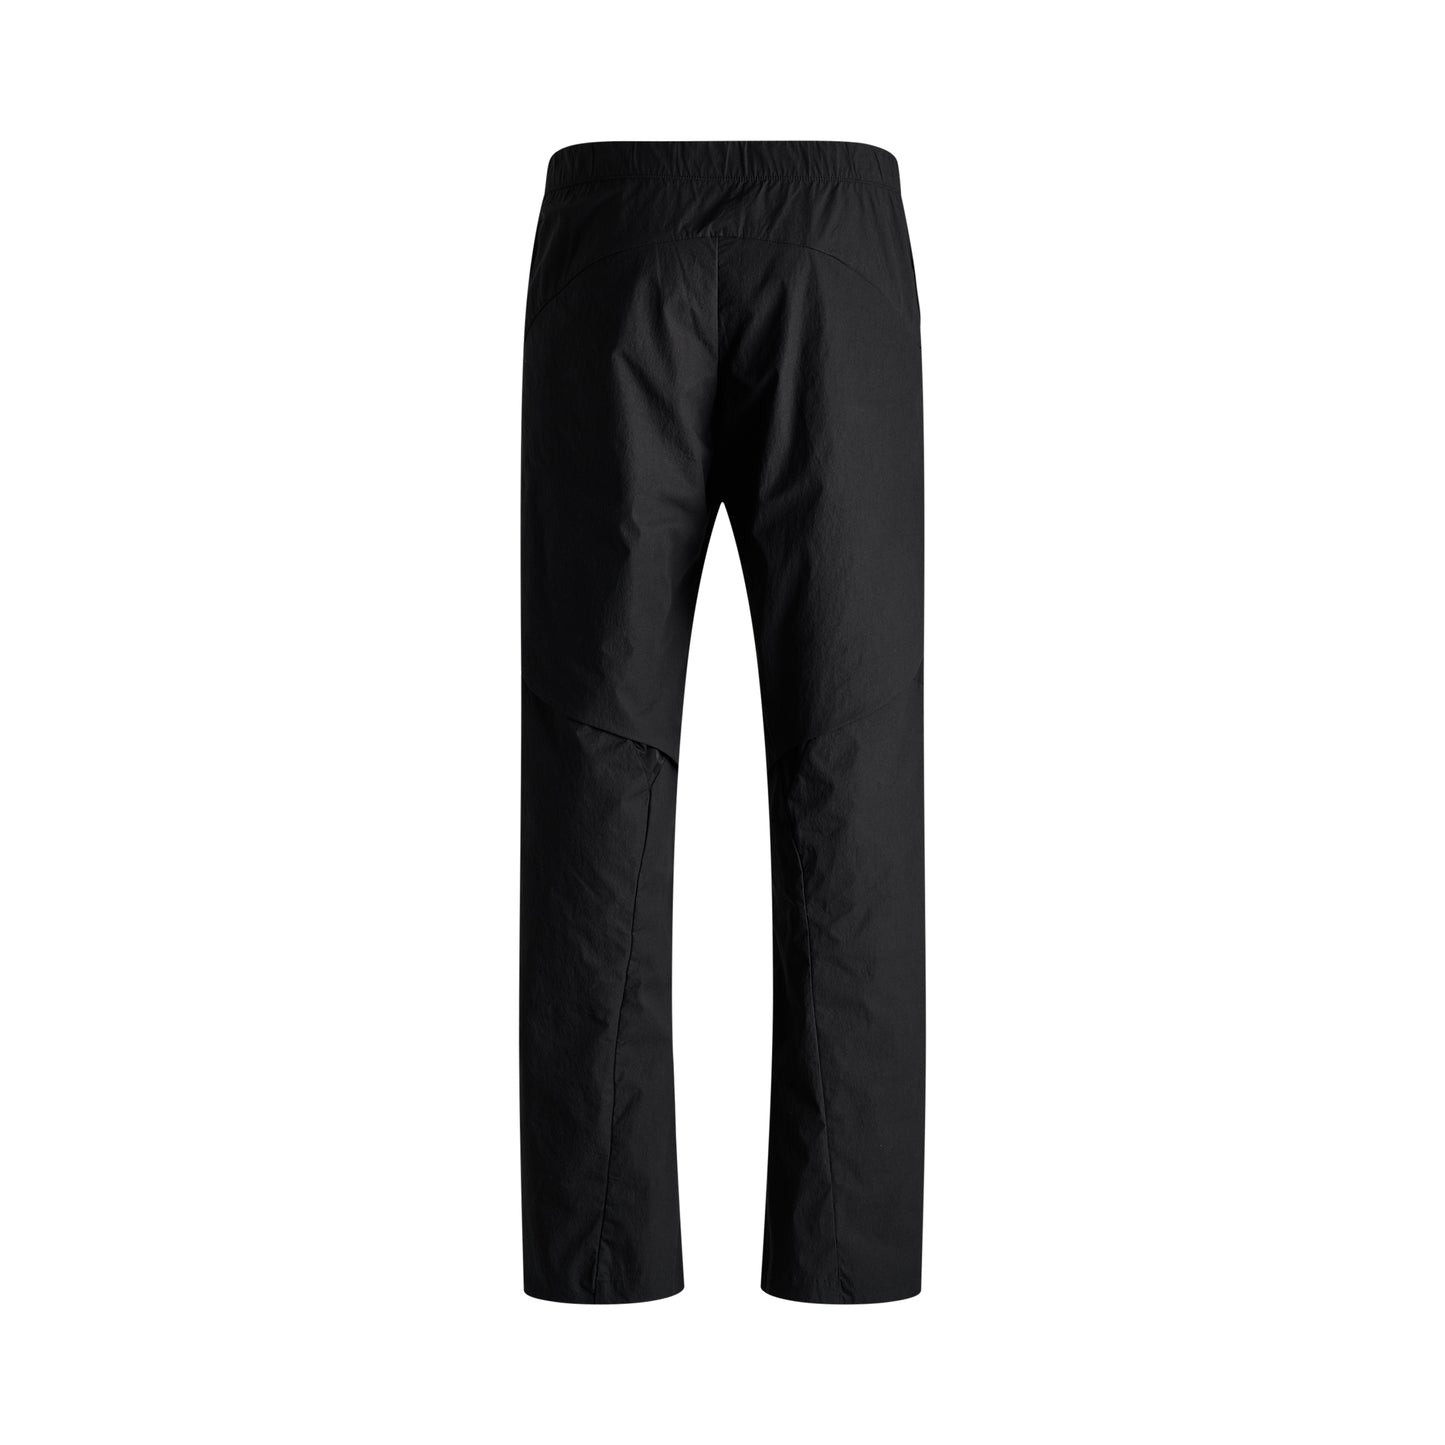 6.0 Technical Pants (Center) in Black